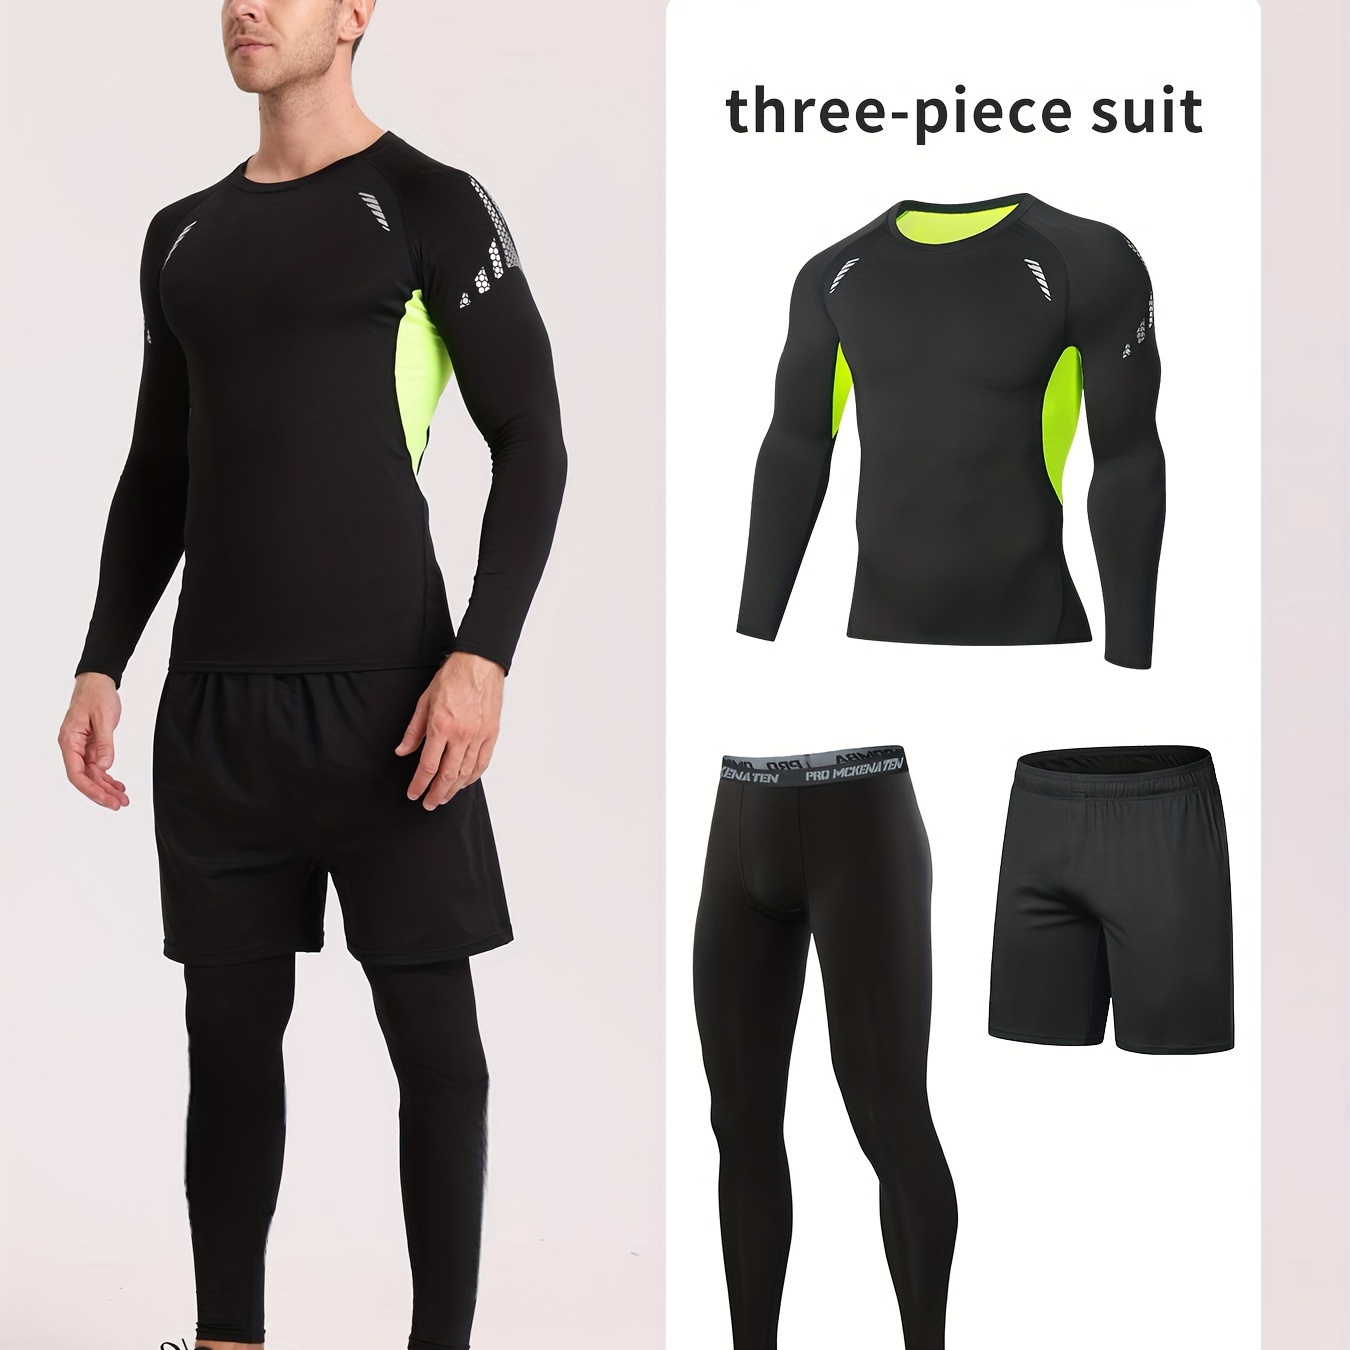 

Men's Color Matching Skinny High Stretch Crew Neck Long Sleeve Shirt & Leggings & Solid Shorts 3-piece Set For Hiking Jogging Cycling Outdoor Fitness Workout